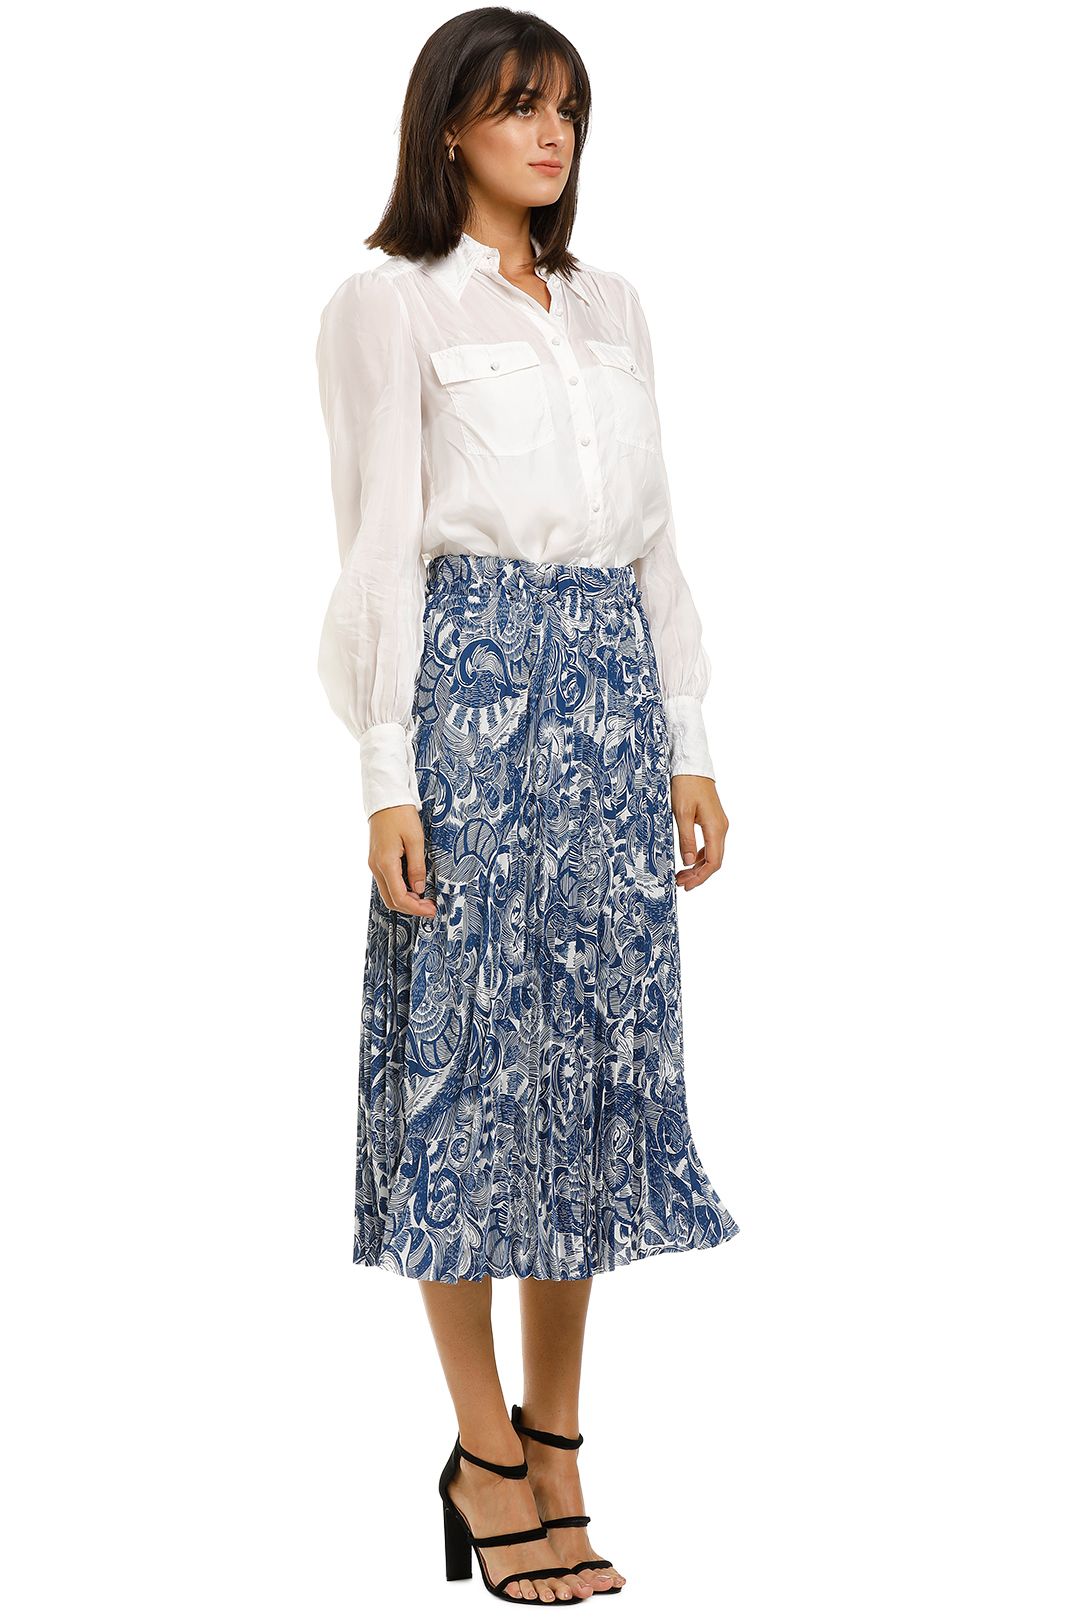 Countr-Road-Print-Pleat-Skirt-Deep-Blue-Front